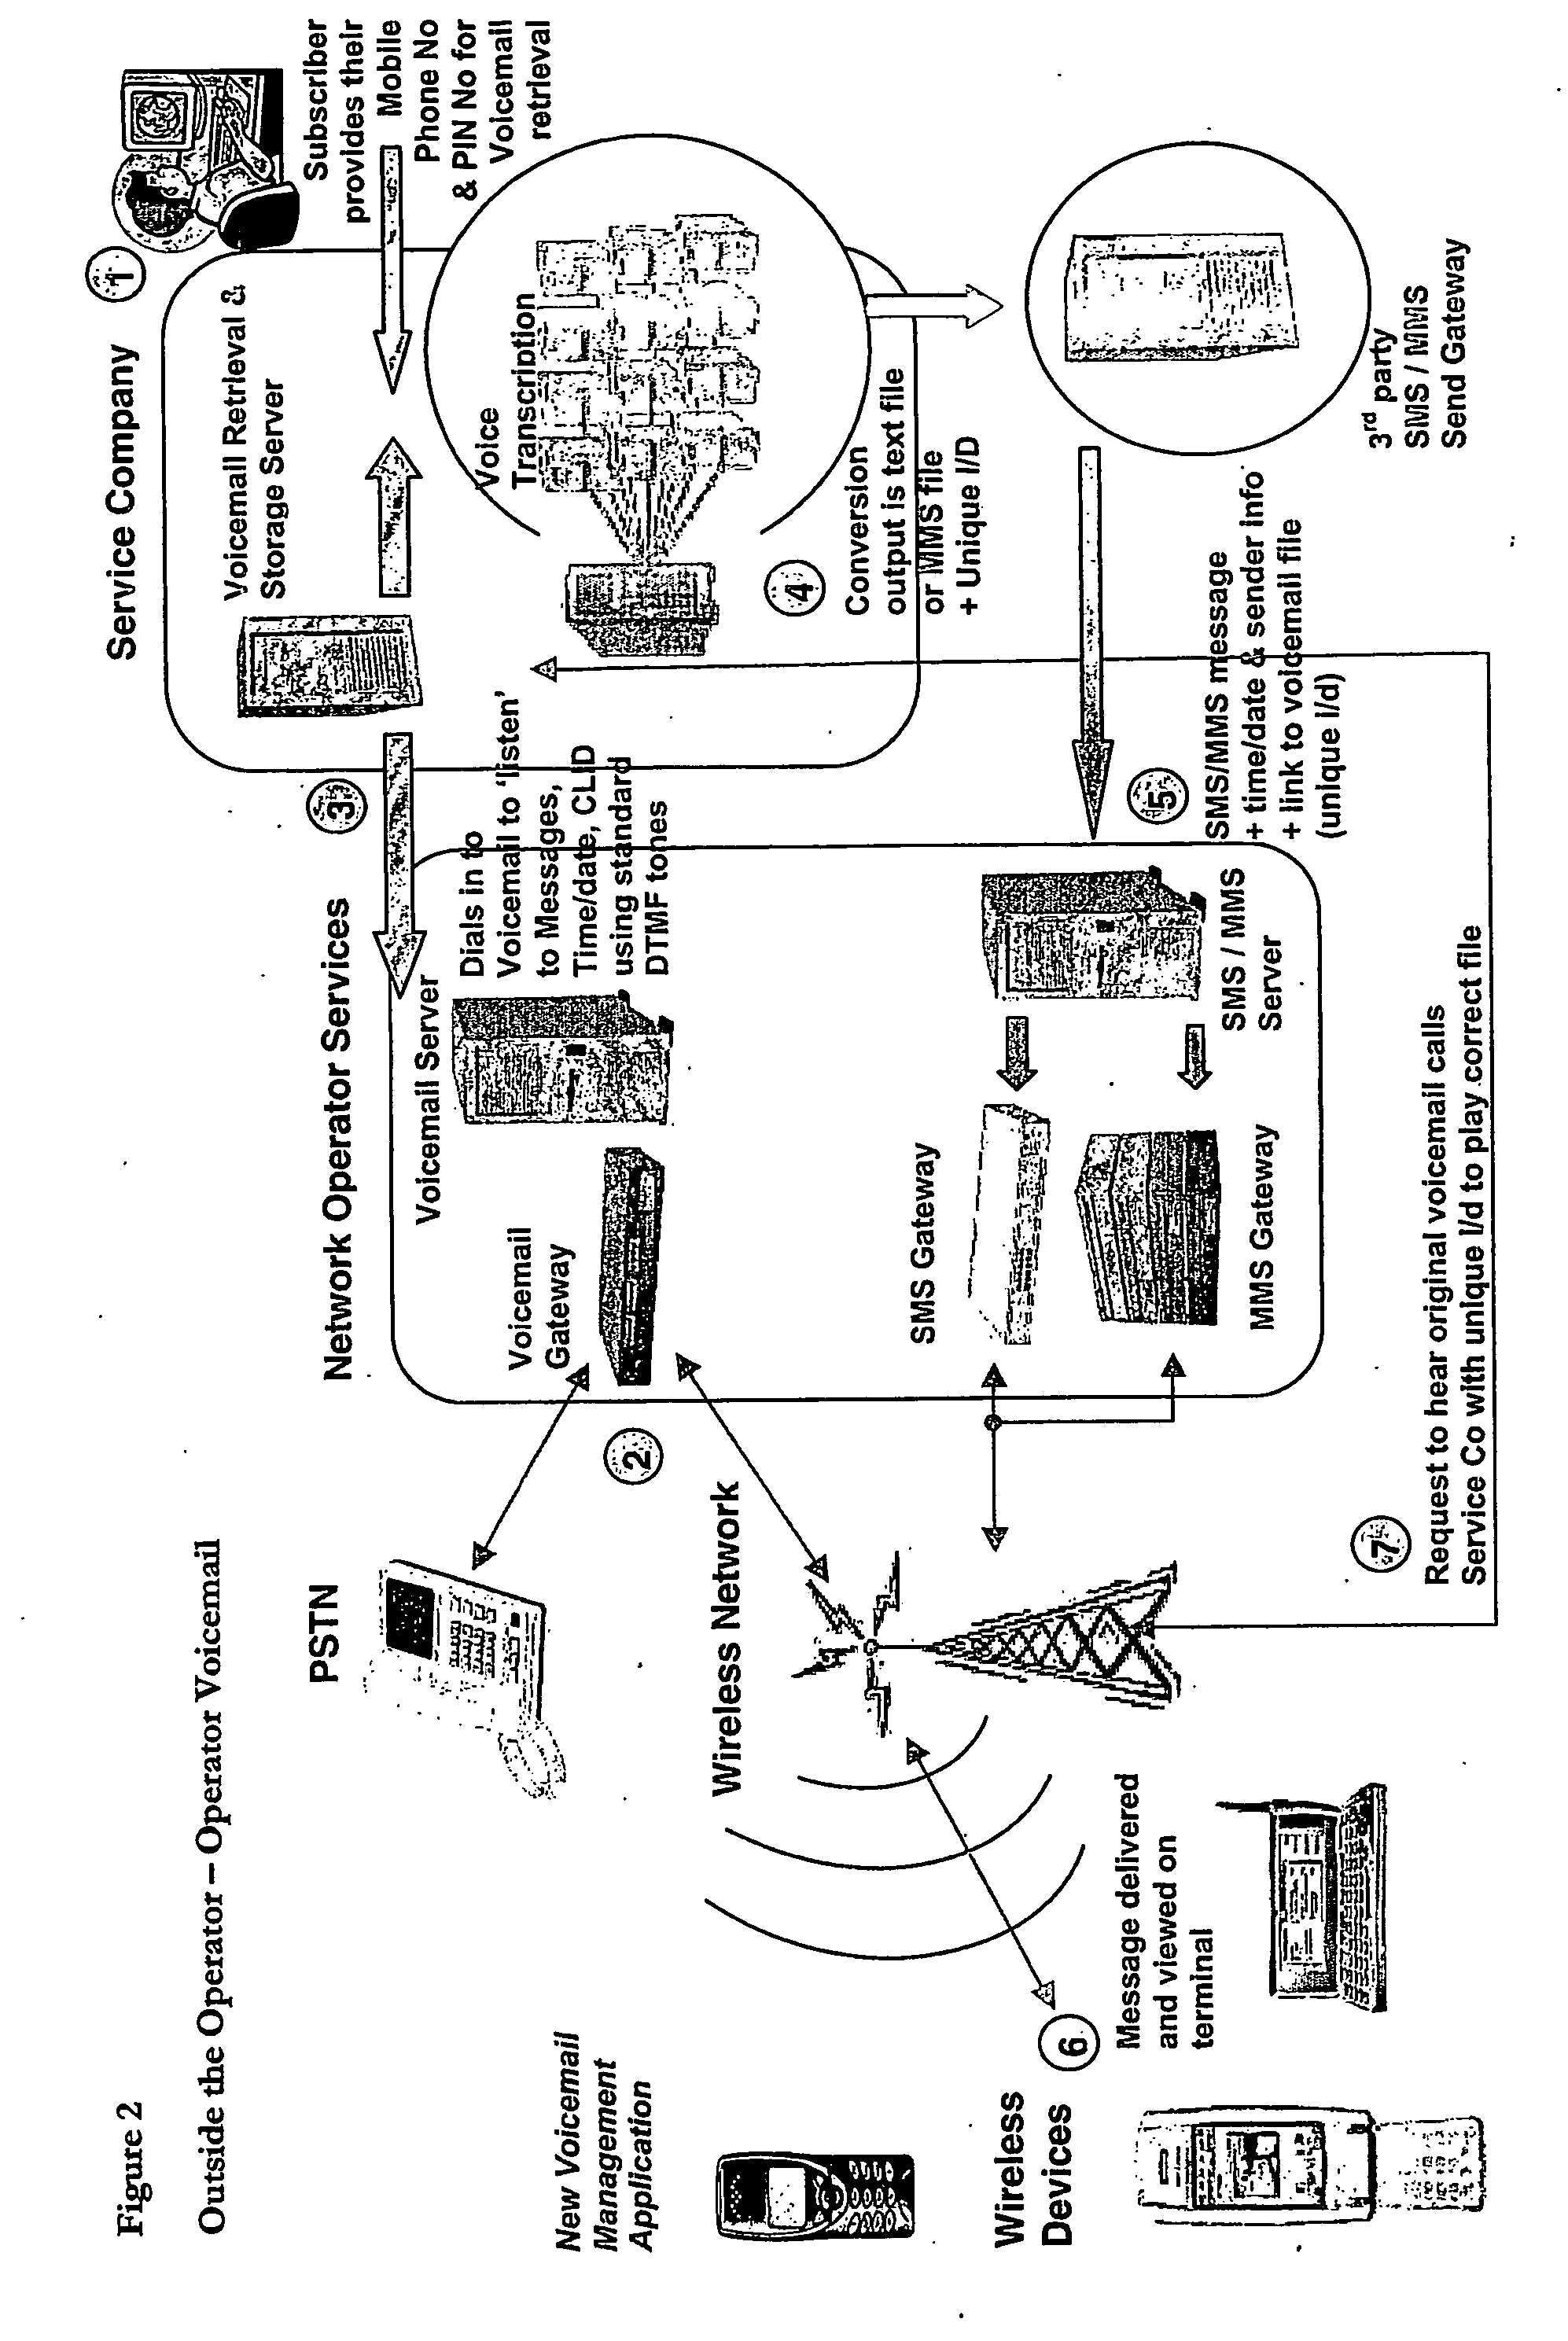 Method of generating a sms or mms text message for receipt by a wireless information device